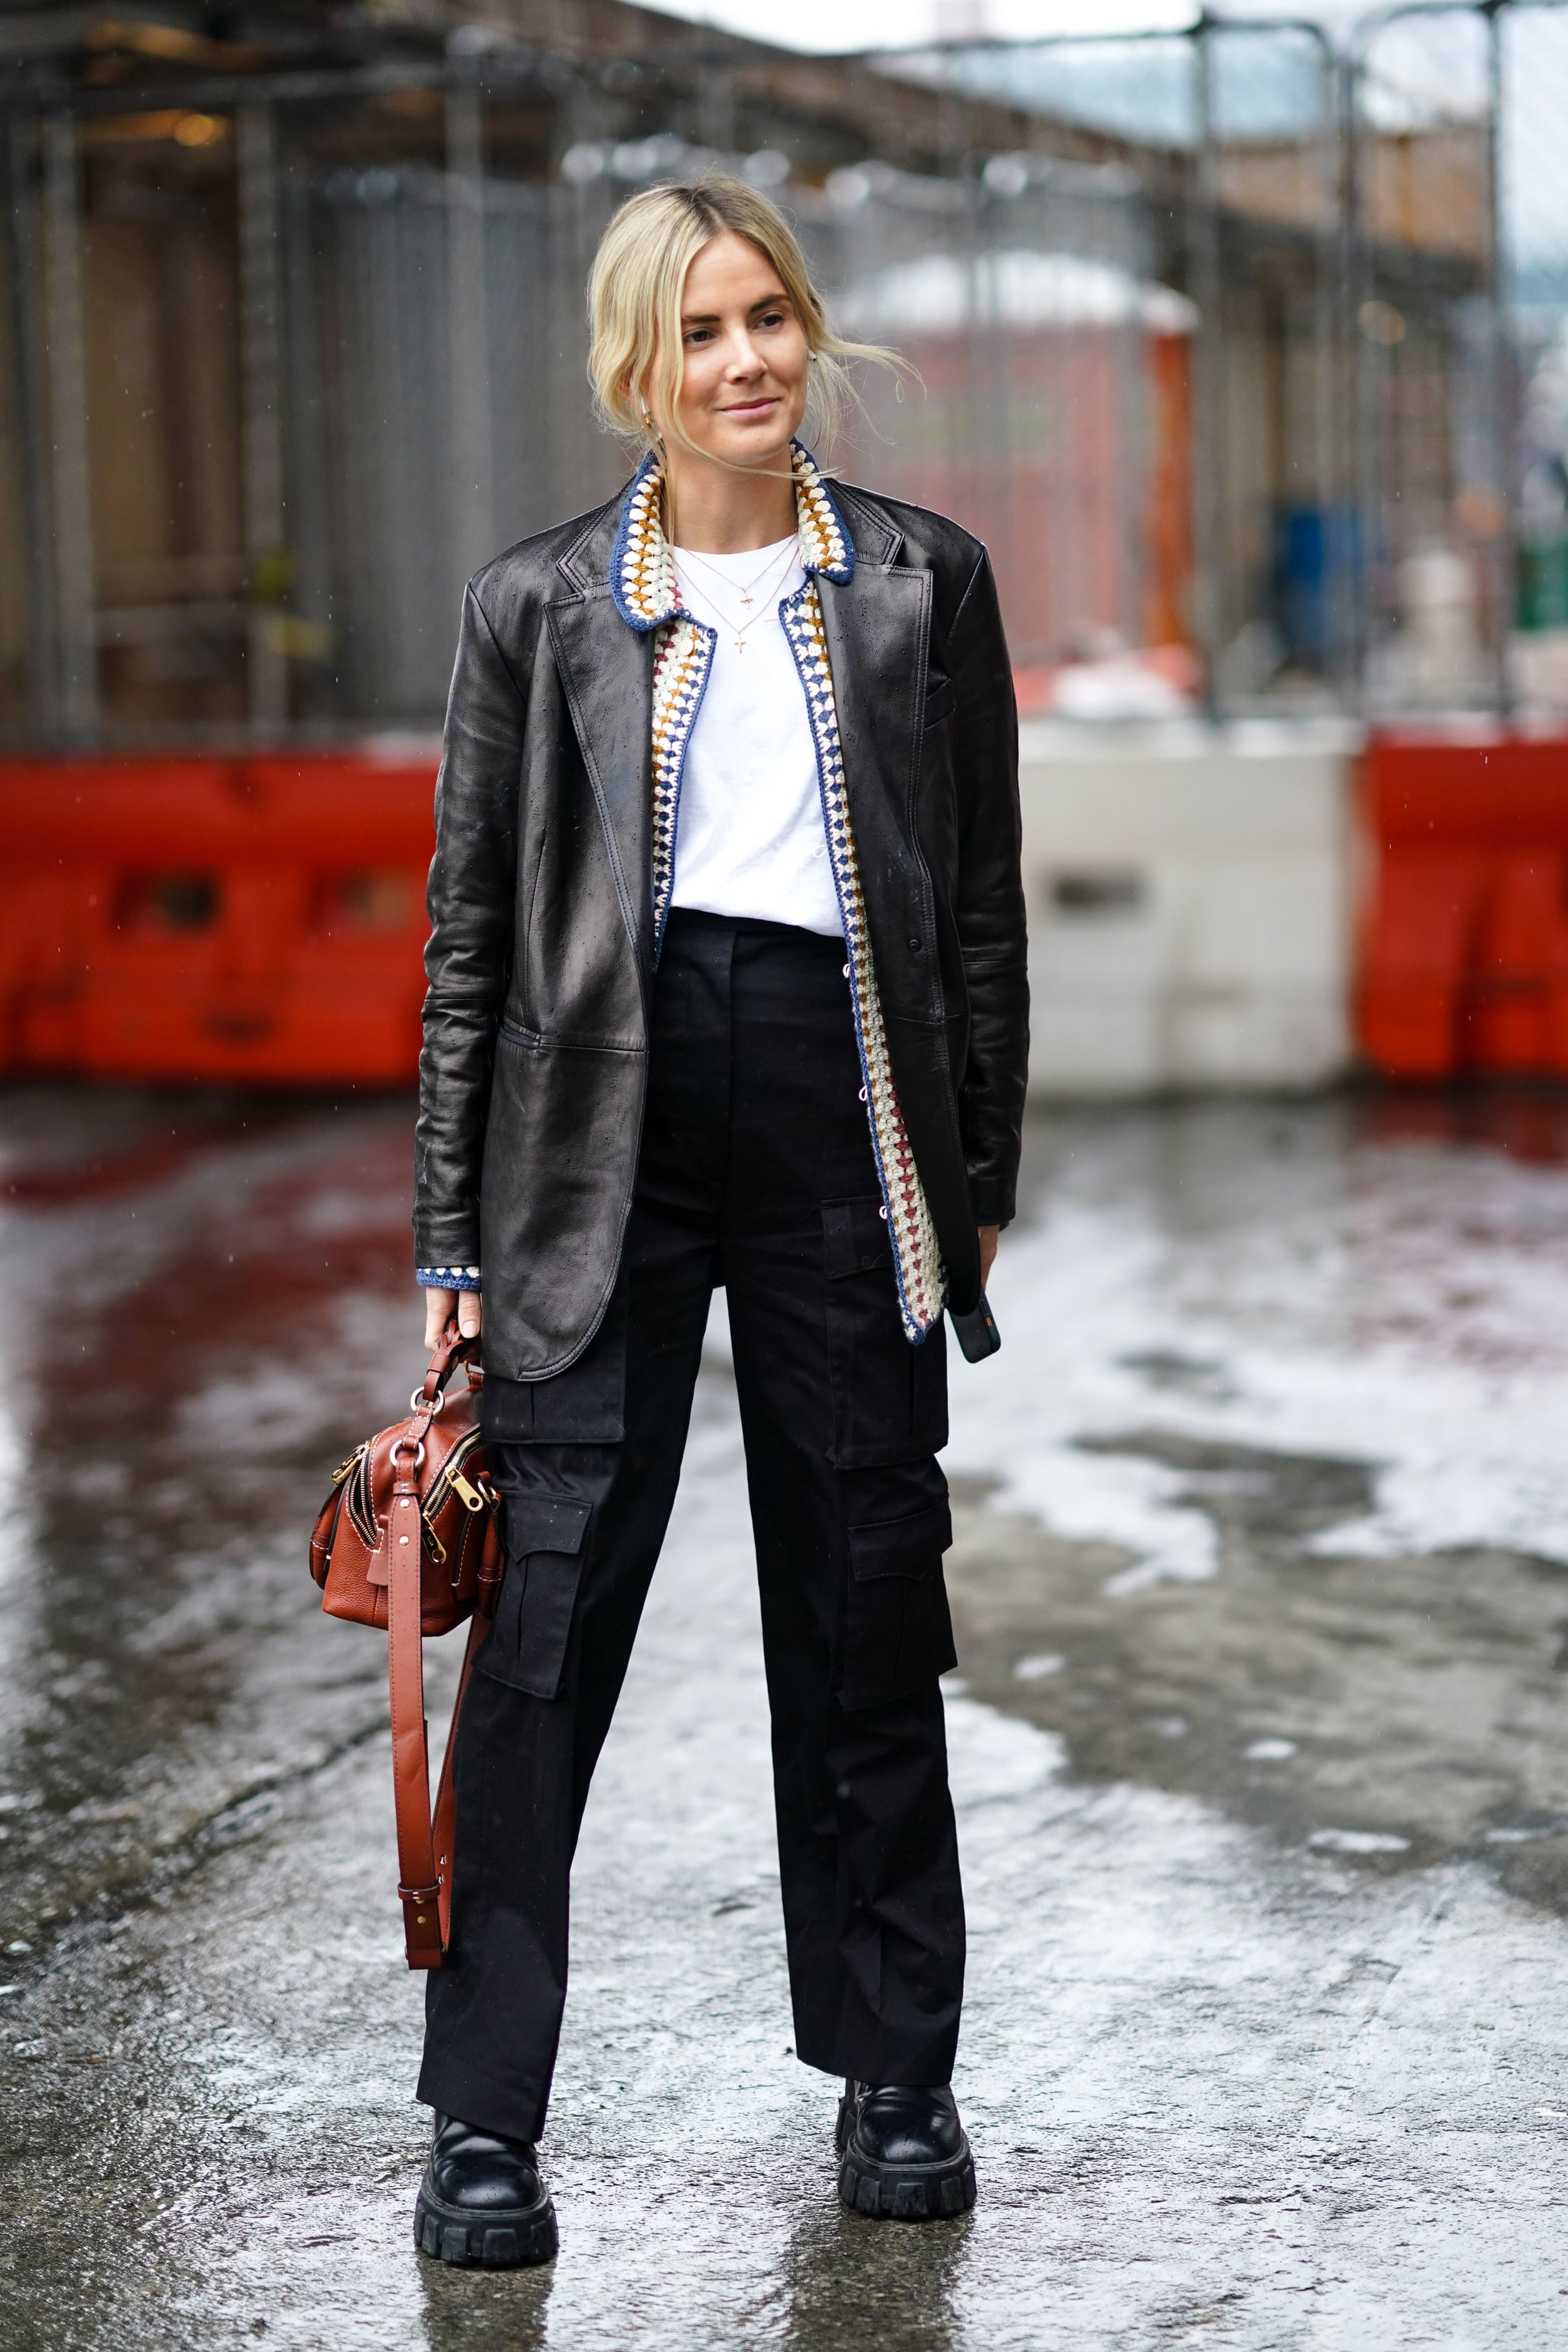 Sydne Style shows how to wear black pants with graphic tee and blazer for  office outfit ideas  Sydne Style